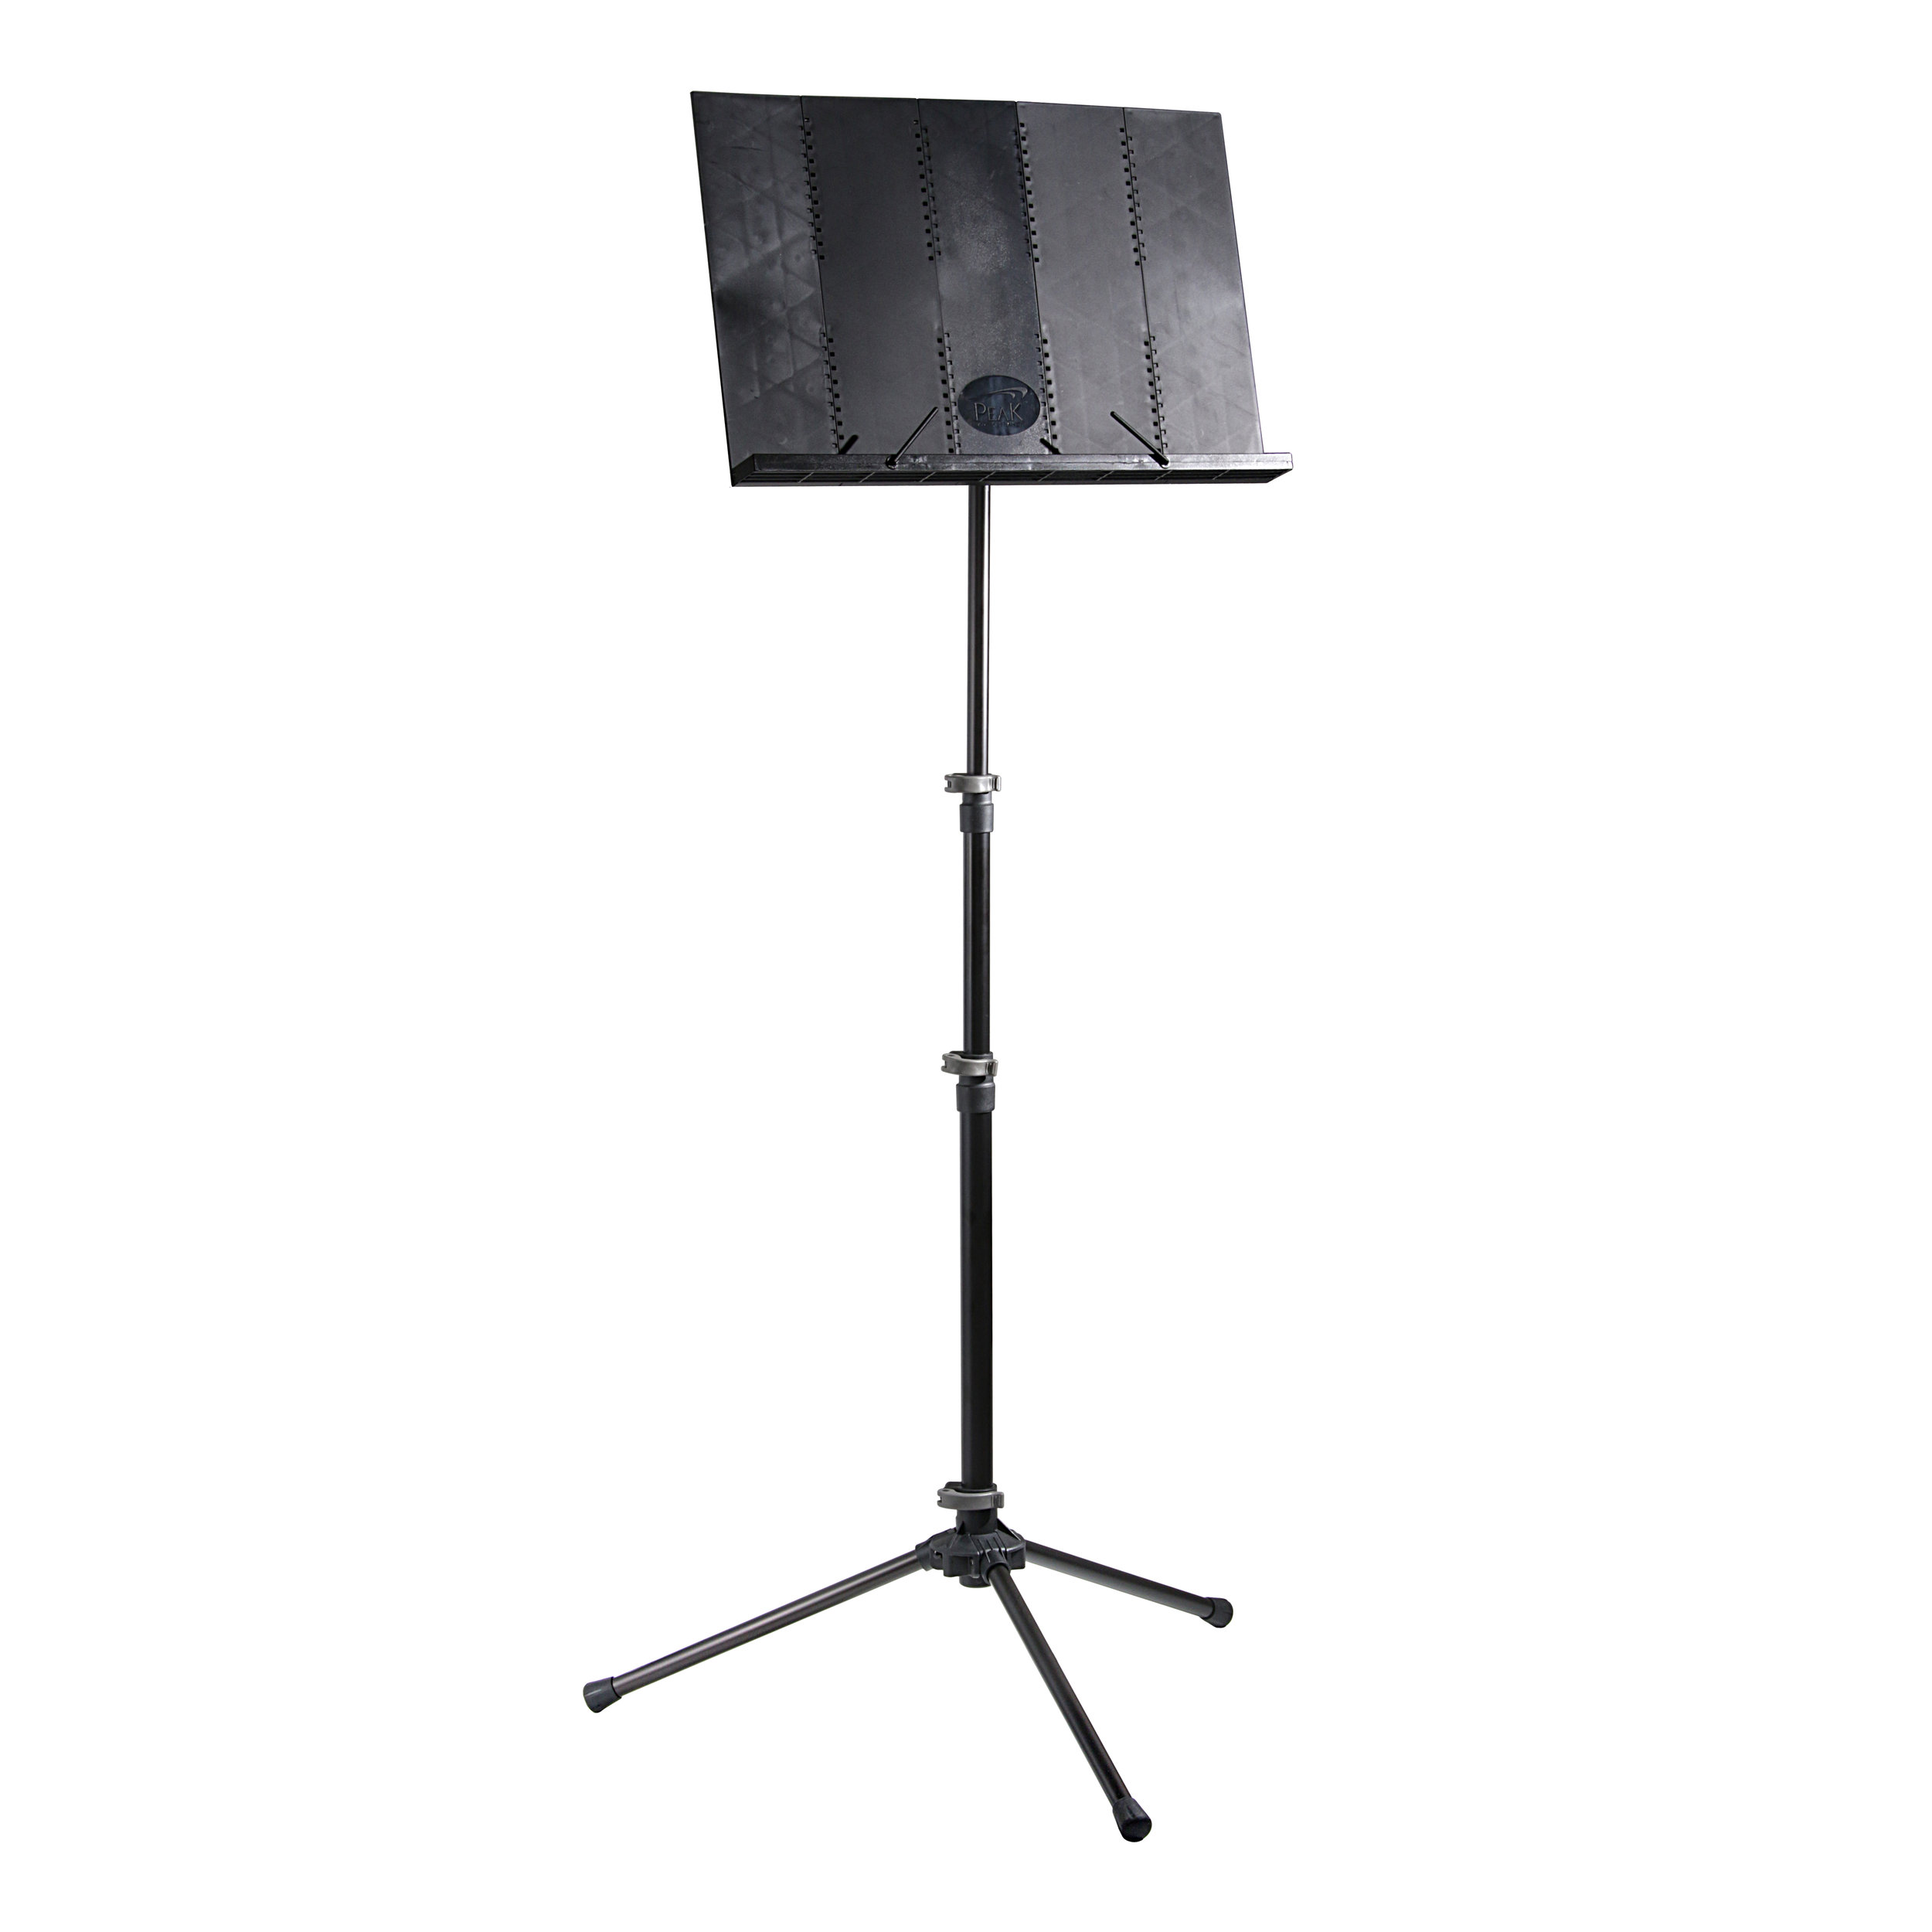 PEAK Products — Peak Stands-The Best Portable Stands